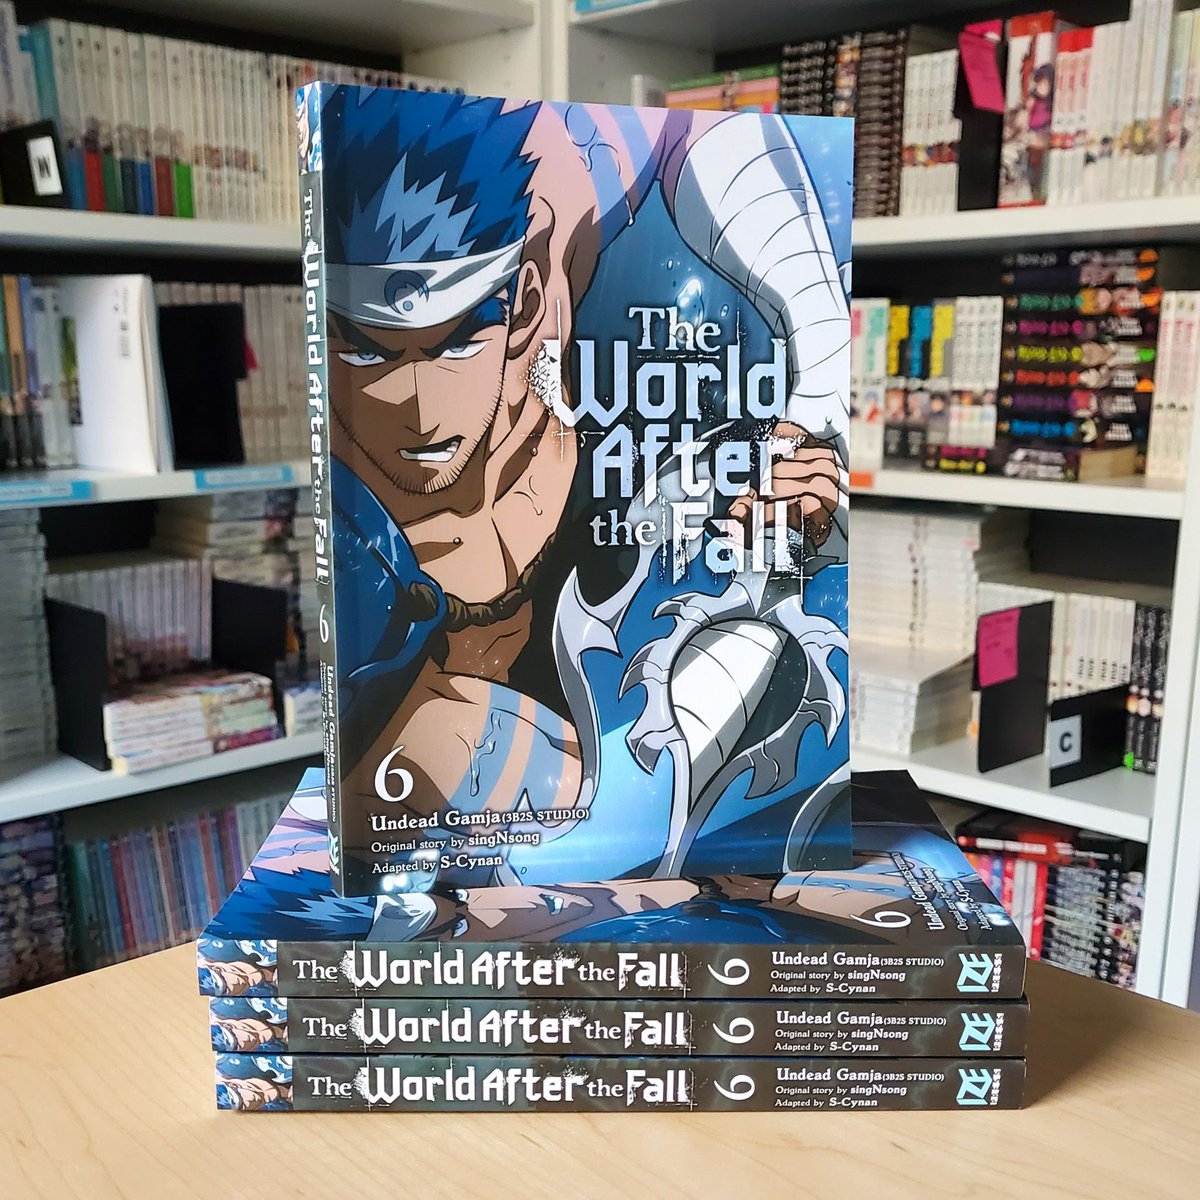 Have you added The World After the Fall to your TBR list yet? With engaging battles and unique characters, this manhwa has it all! The World After the Fall, Vol. 6 releases next week, so camp out at your local bookstores until they stock their shelves!: buff.ly/3wgjYzE